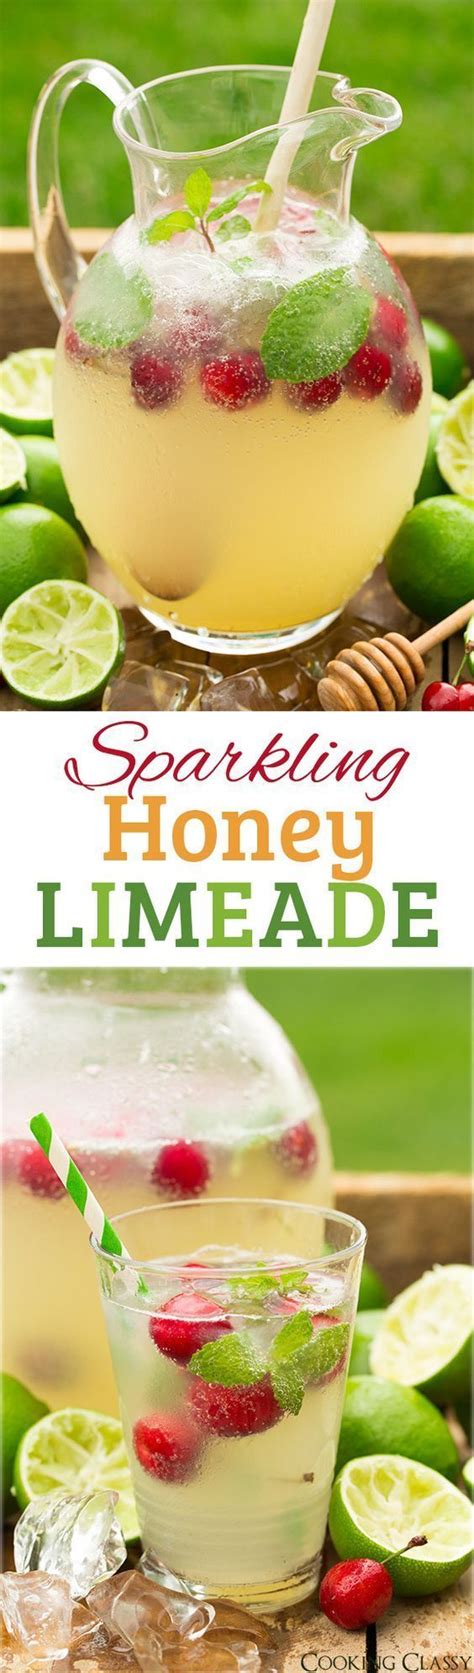 This fresh strawberry limeade is packed with fresh limes and strawberries, then blended to perfection! Sparkling Honey Limeade - I love this flavor combo! Such a ...